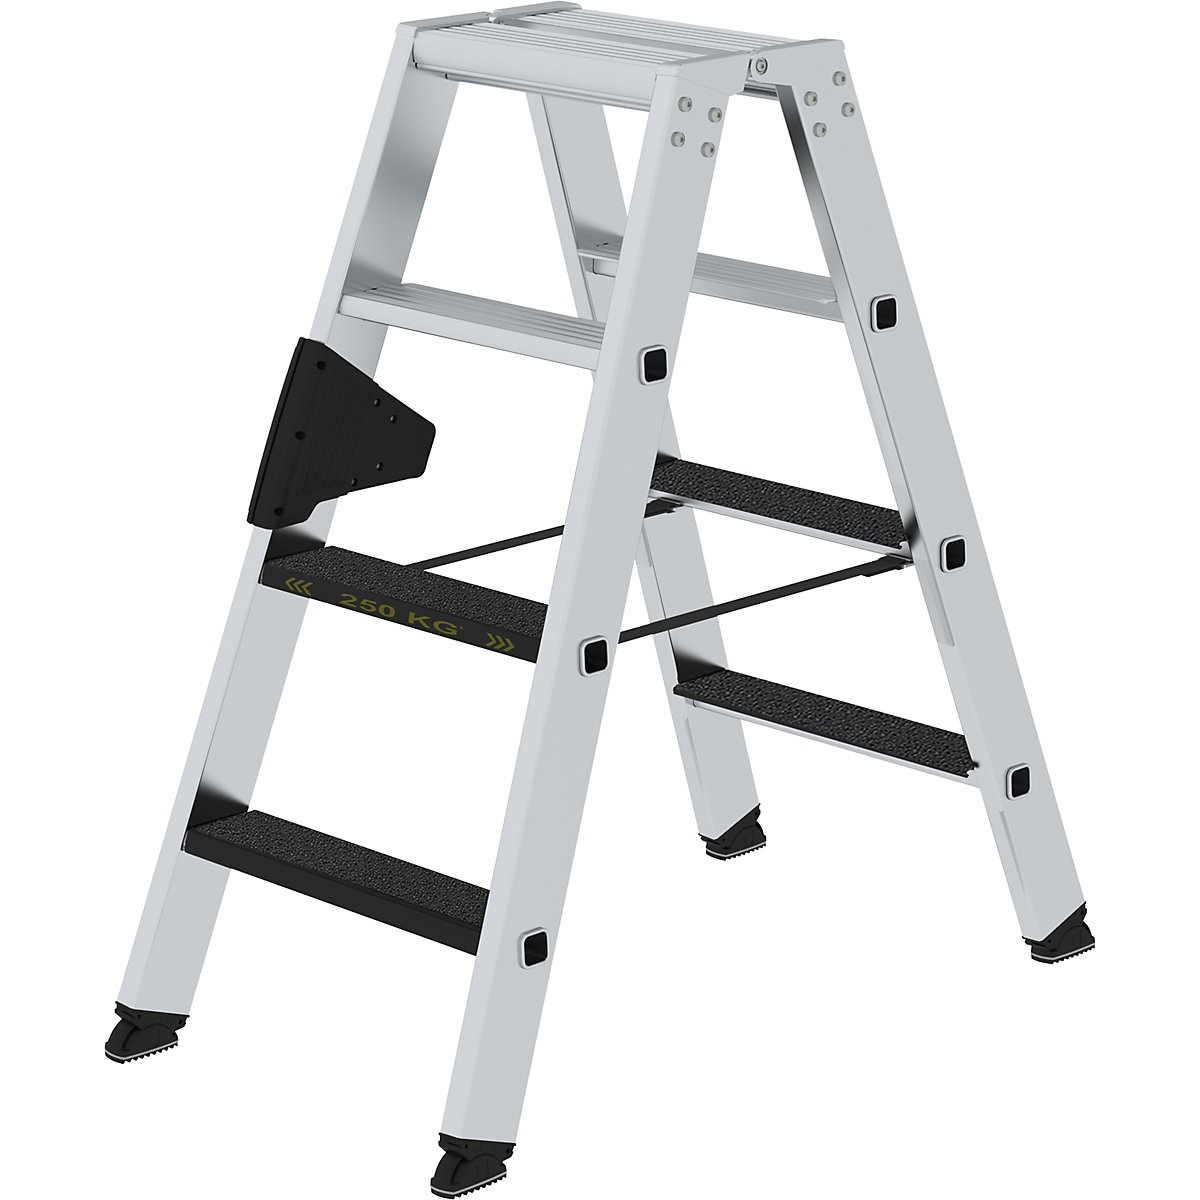 CLIP-STEP step ladder – MUNK, double sided access, slip resistant R13, heavy duty, 2 x 4 steps-11